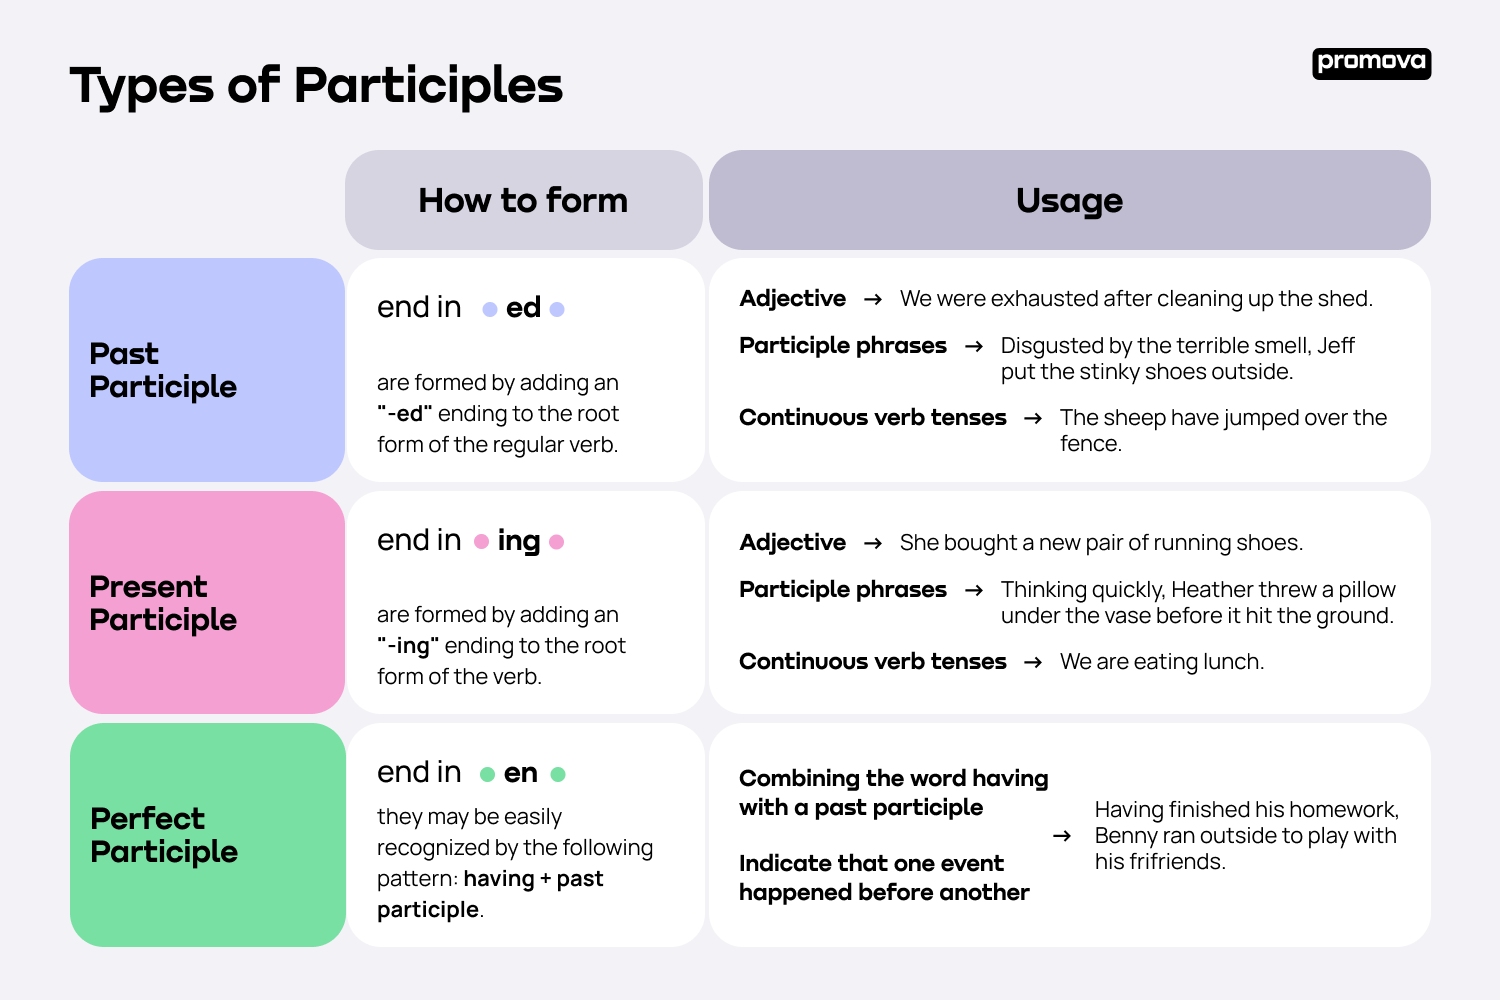 Exploring the Different Types of Participles in Language